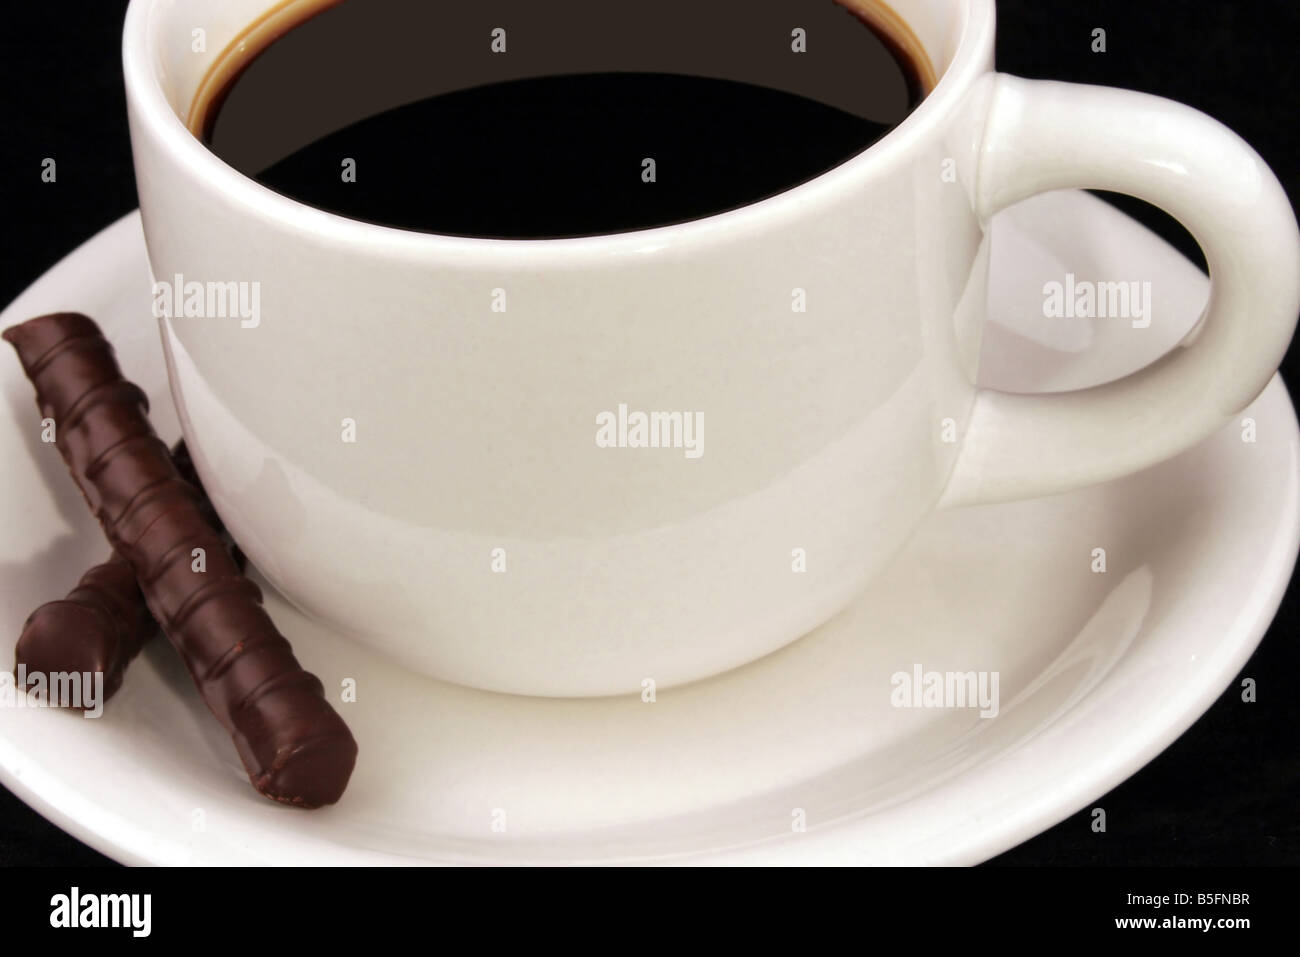 A white cup filled with black coffee and two chocolates resting on the saucer. Stock Photo